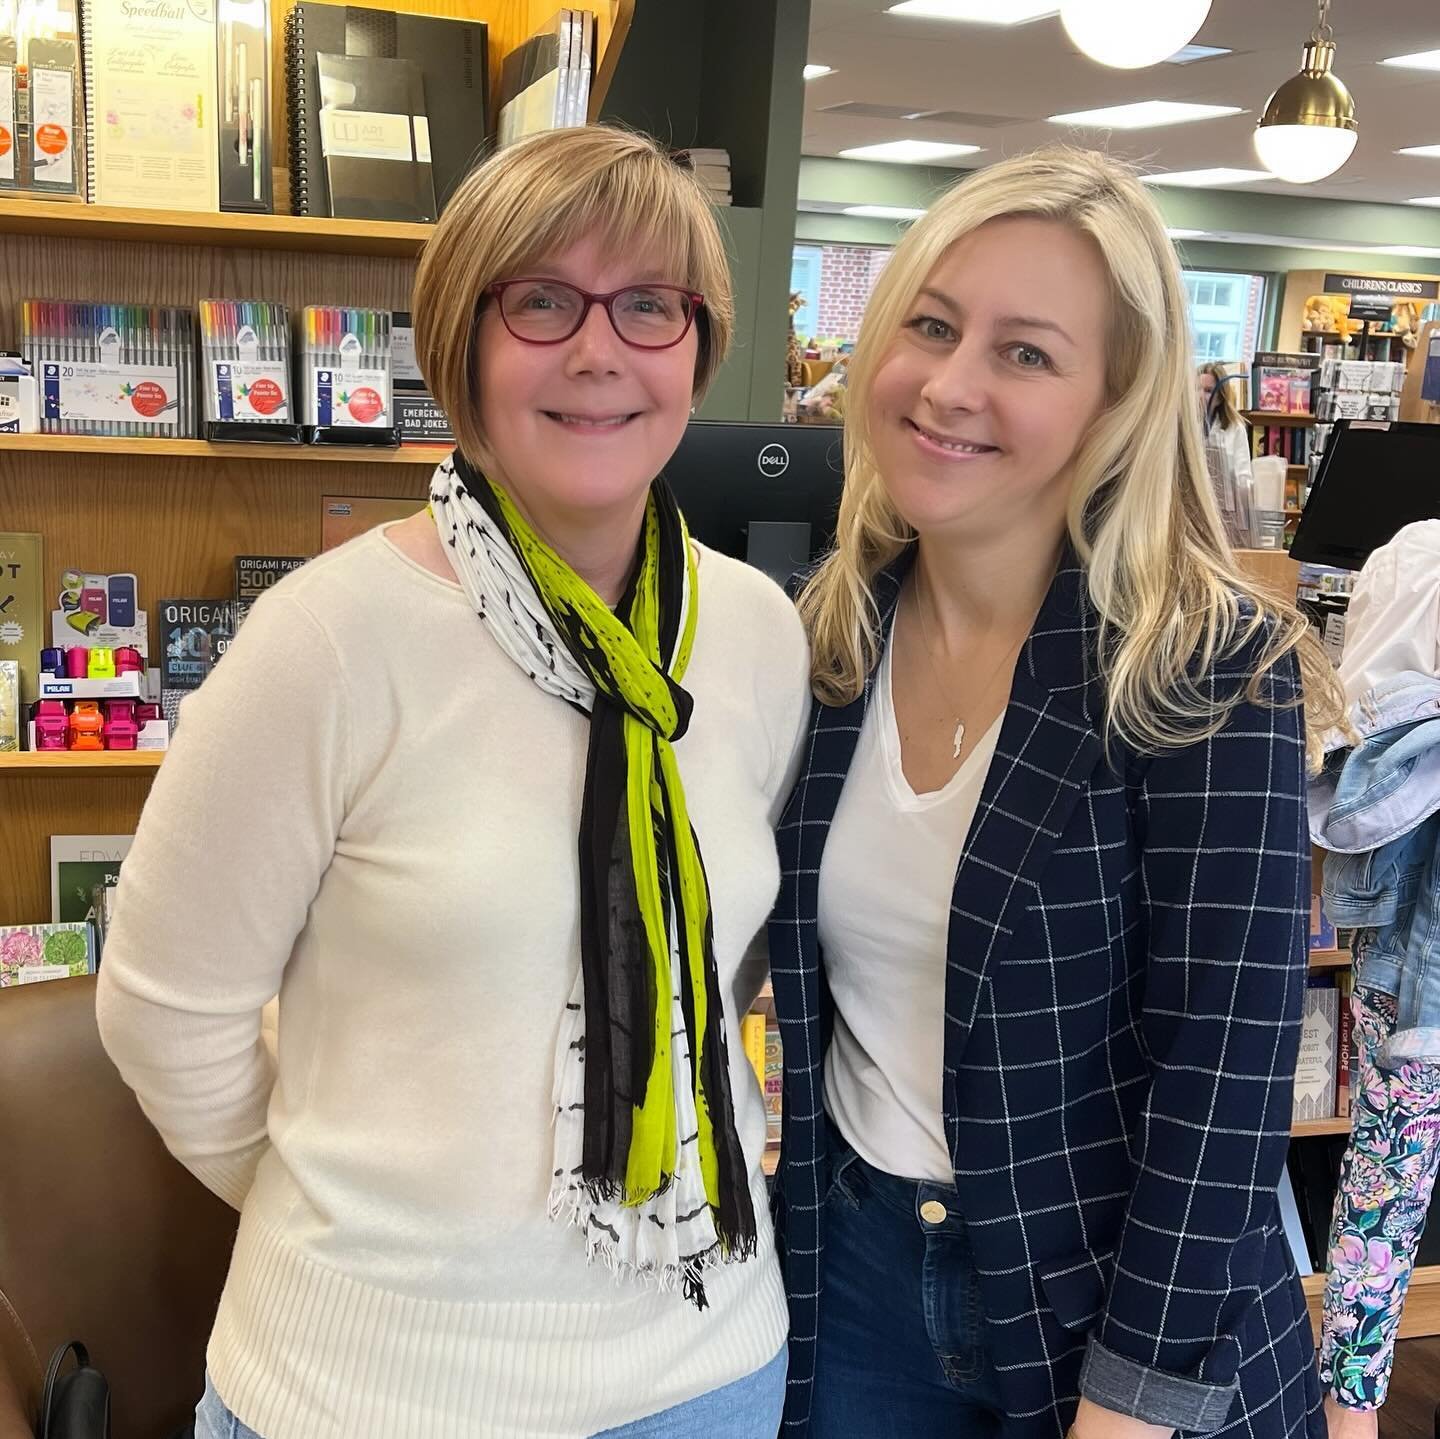 What a delight it was to celebrate  #independentbookstoreday with @kareneolson and @barrettbookstore_! Karen and I chatted about her excellent new novel AN INCONVENIENT WIFE, which is a must-read for modern mystery and Tudor fans alike. Thanks to Cra